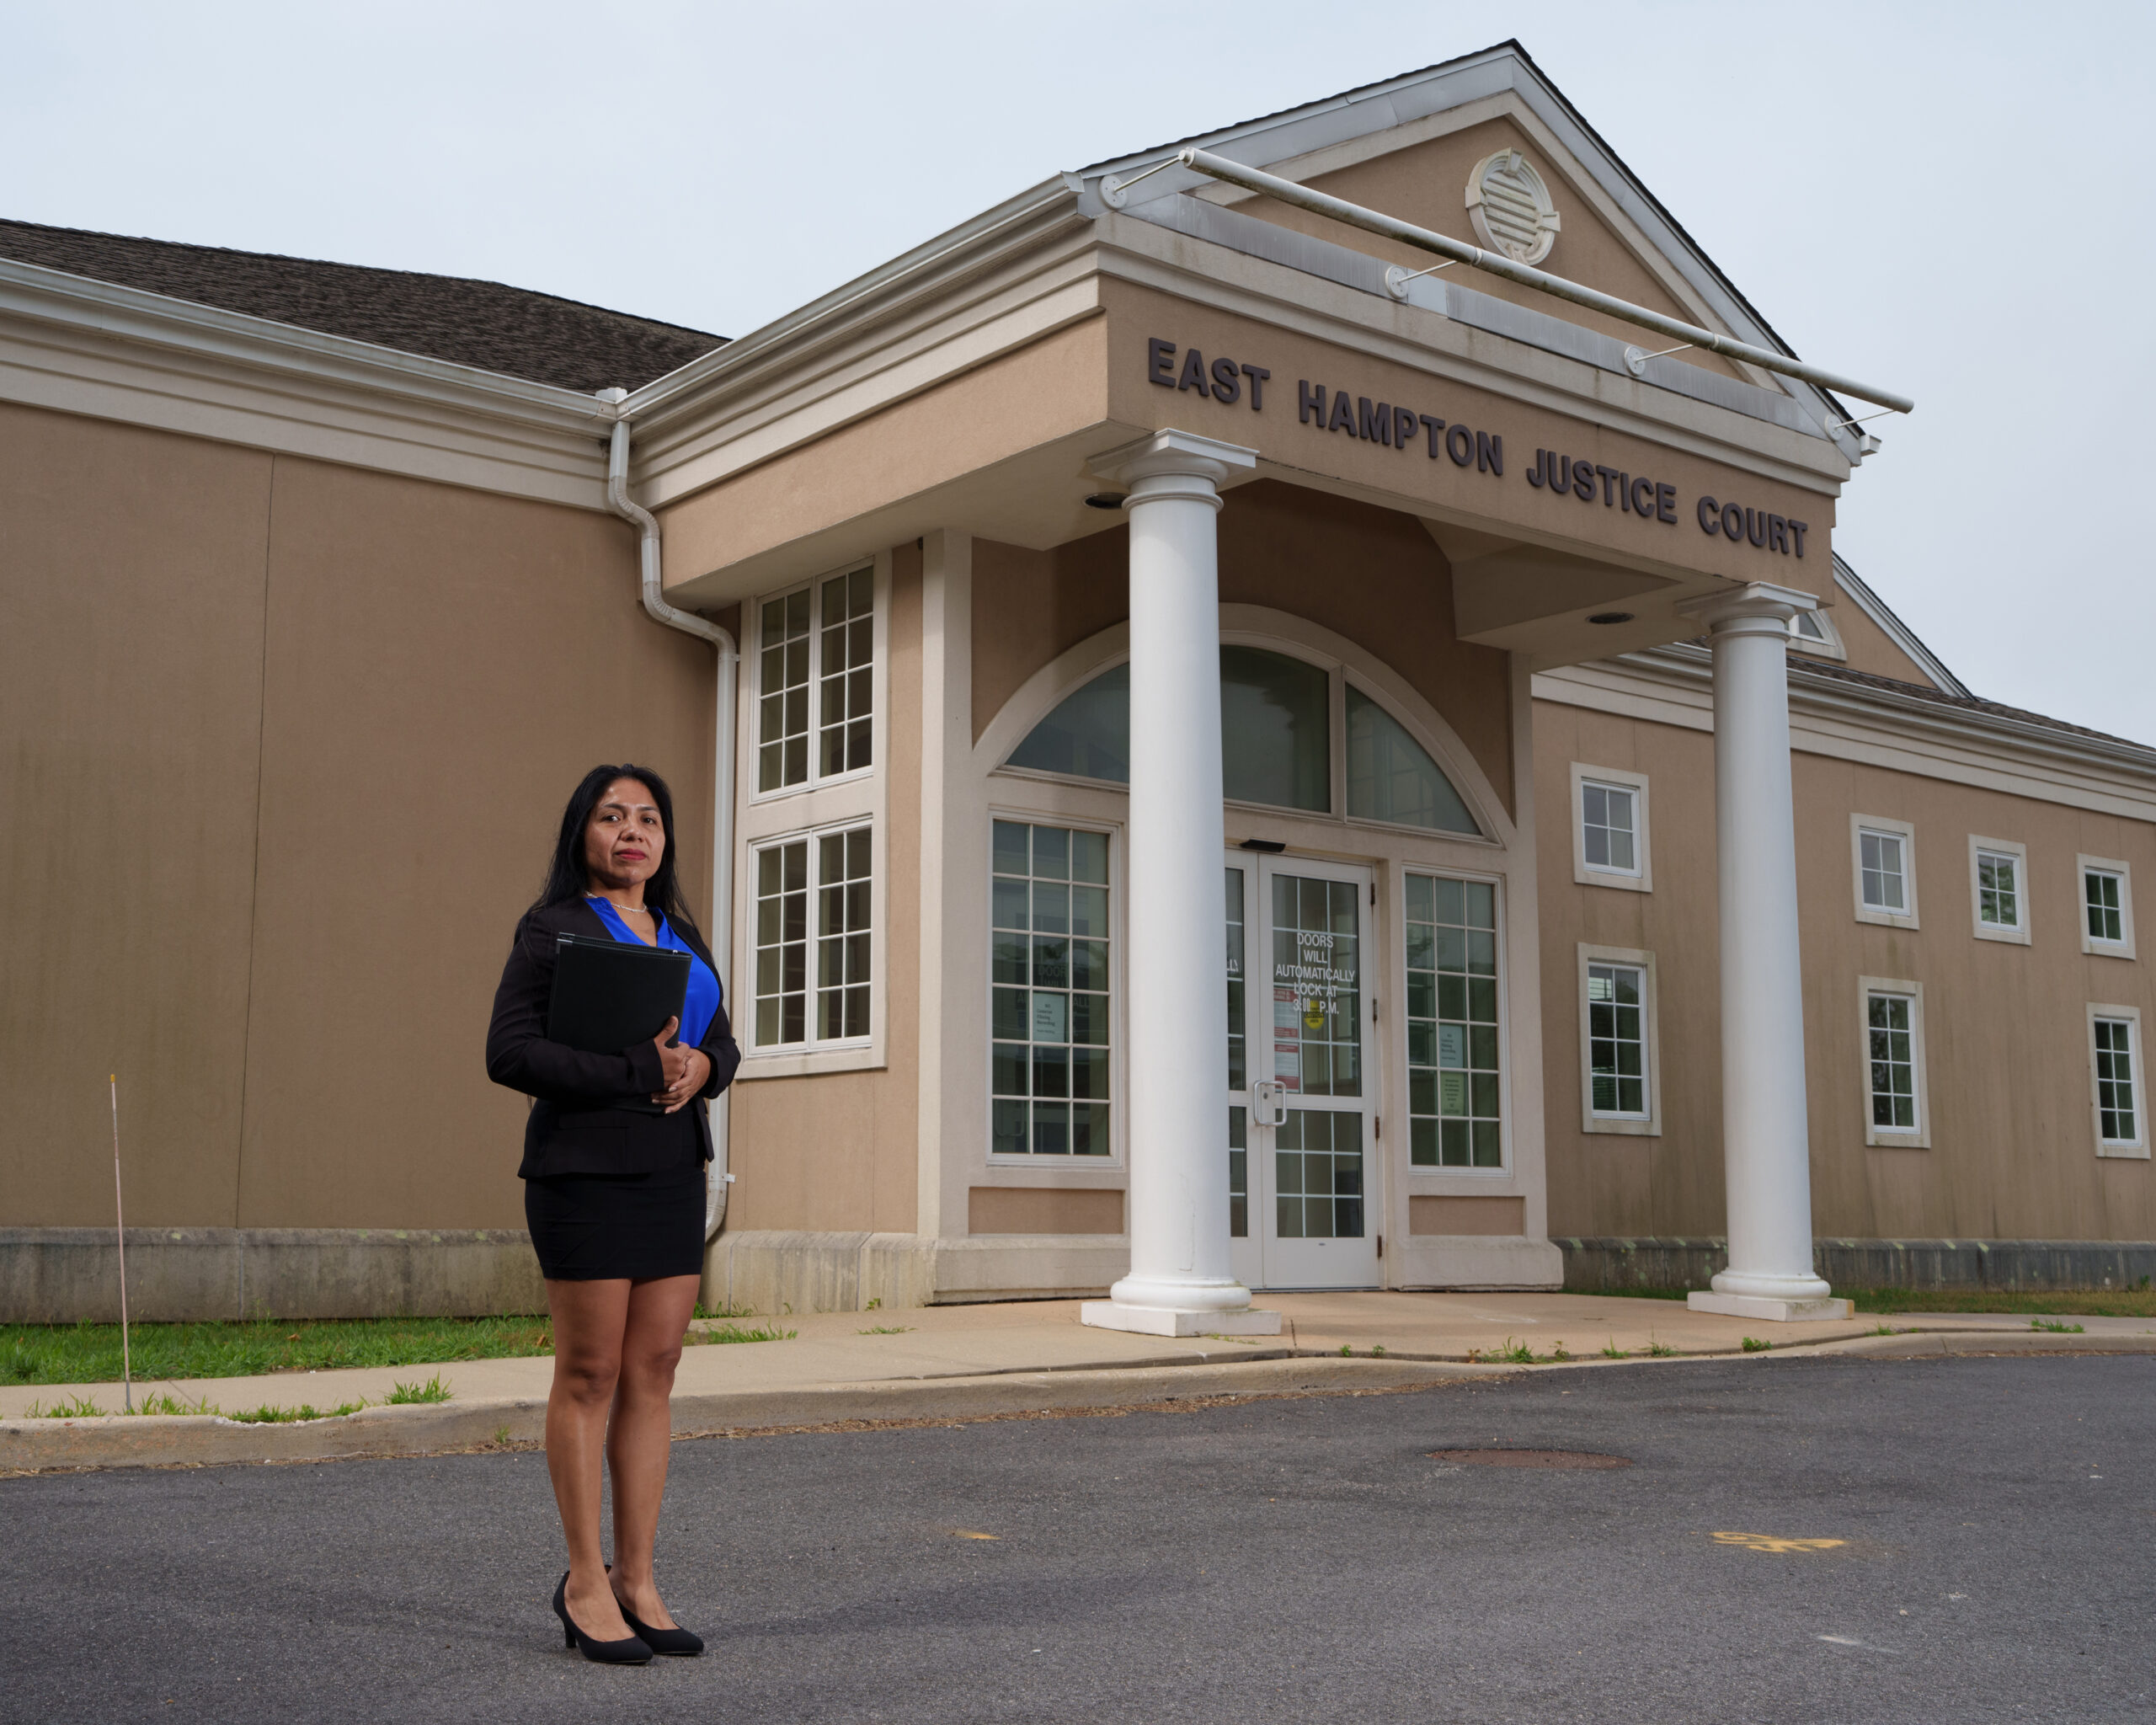 Erika Padilla, the legal administrative assistant for Organización Latino Americana of Eastern Long Island, visits the East Hampton Town Justice Court every Monday morning to help members of the Latino community. LORI HAWKINS